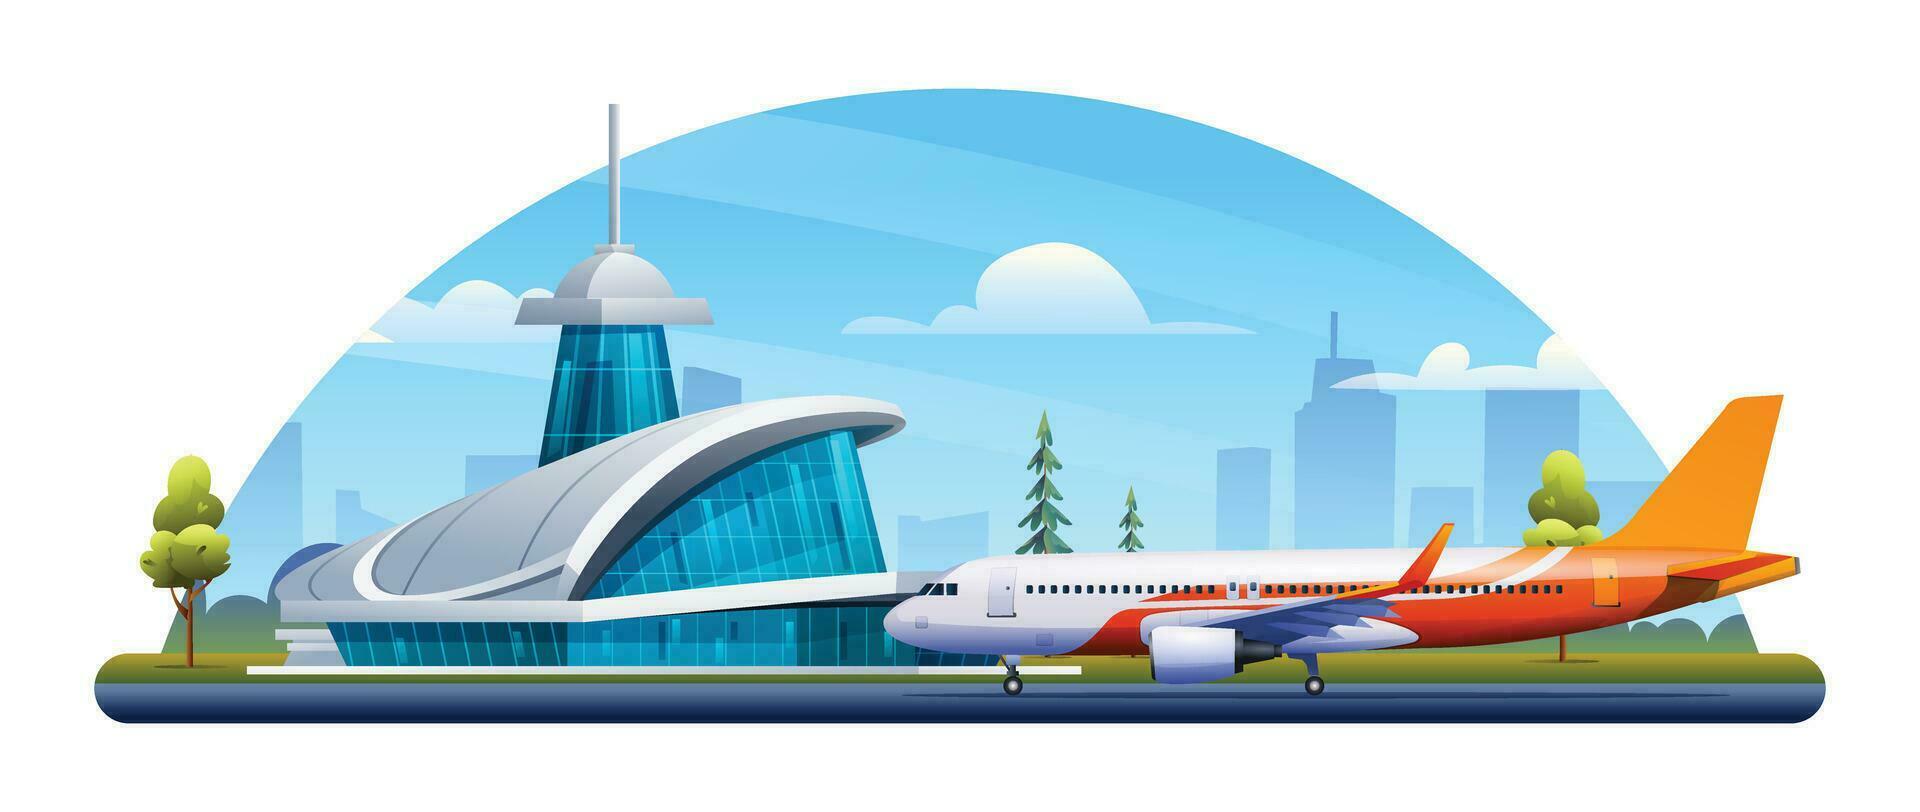 International airport building with airplane and city landscape. Vector illustration